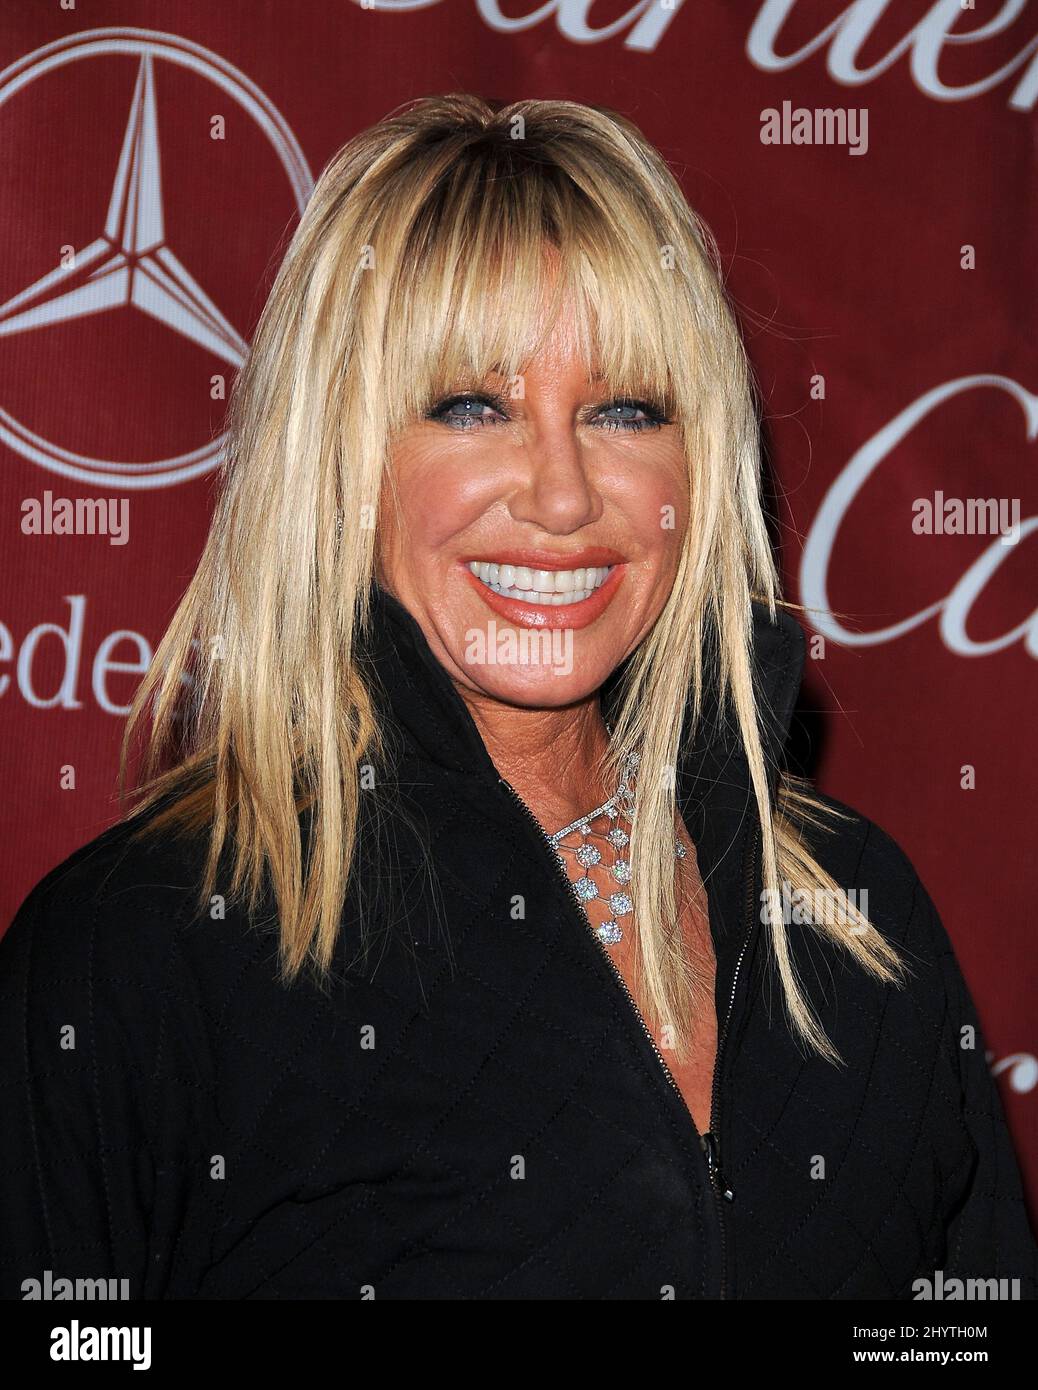 Suzanne Somers attends the 20th Annual Palm Springs International Film Festival Awards Gala at the Palm Springs Convention Center Stock Photo